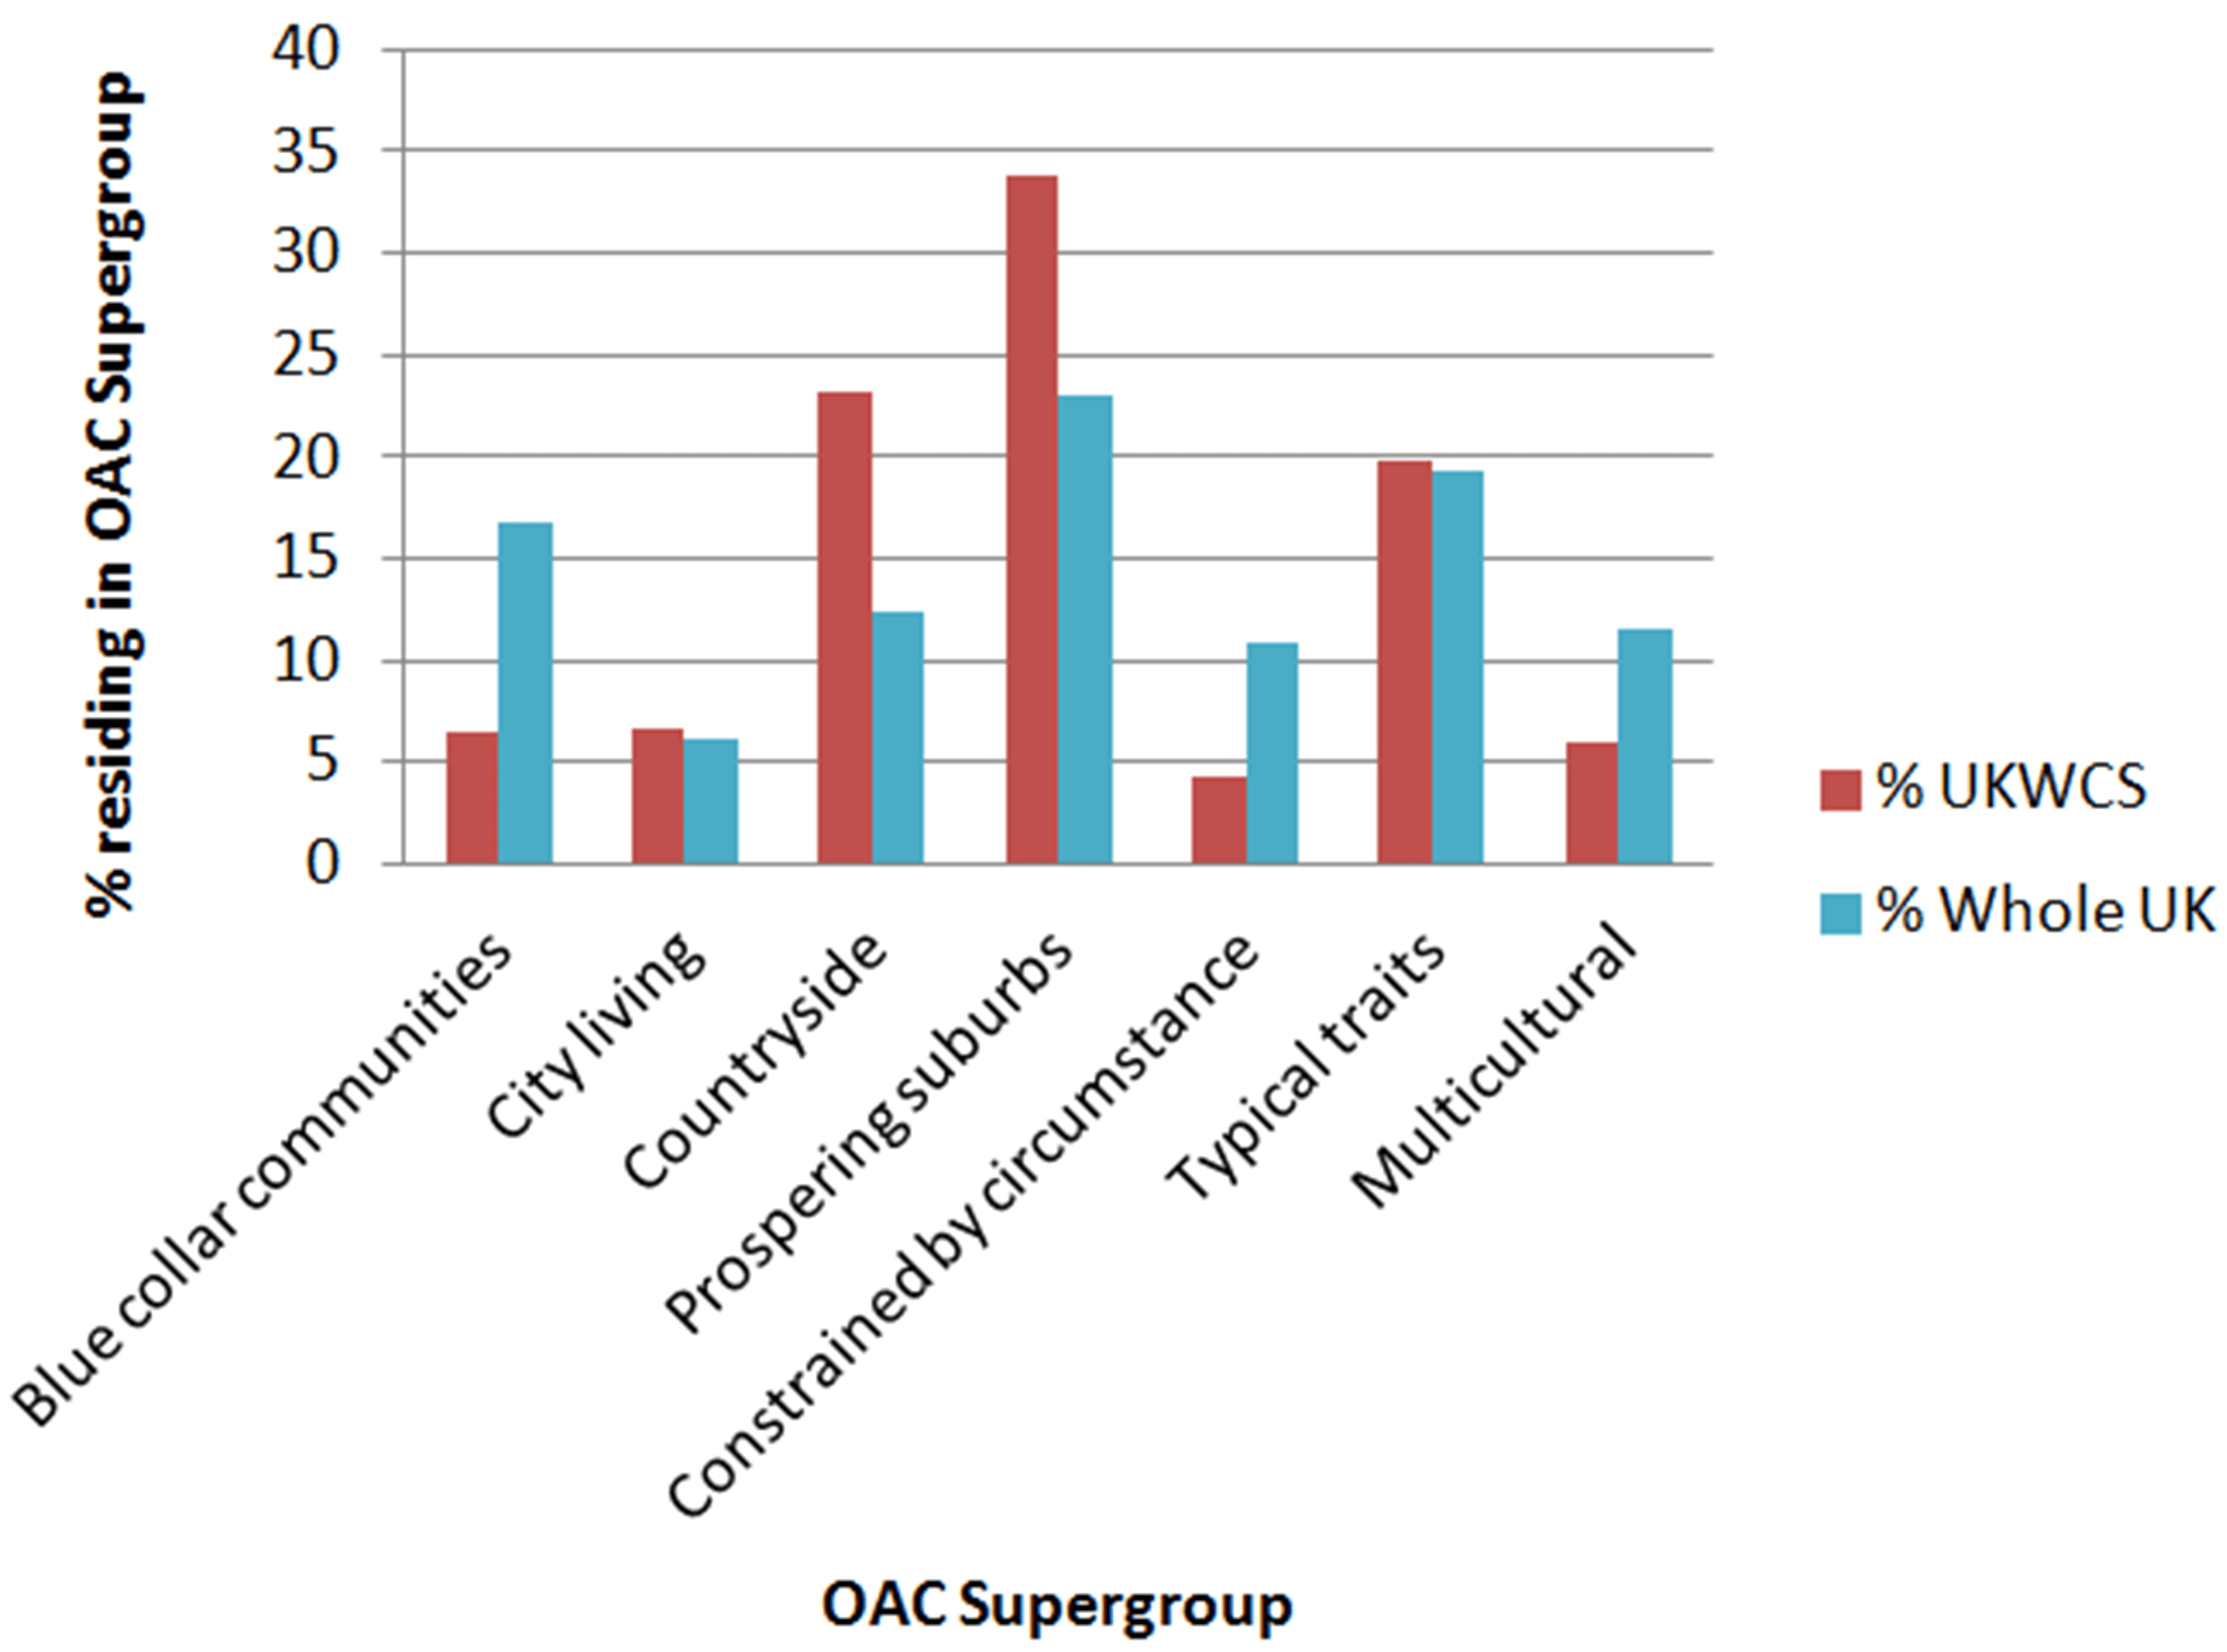 UKWCS compared to the UK population, by OAC Supergroup